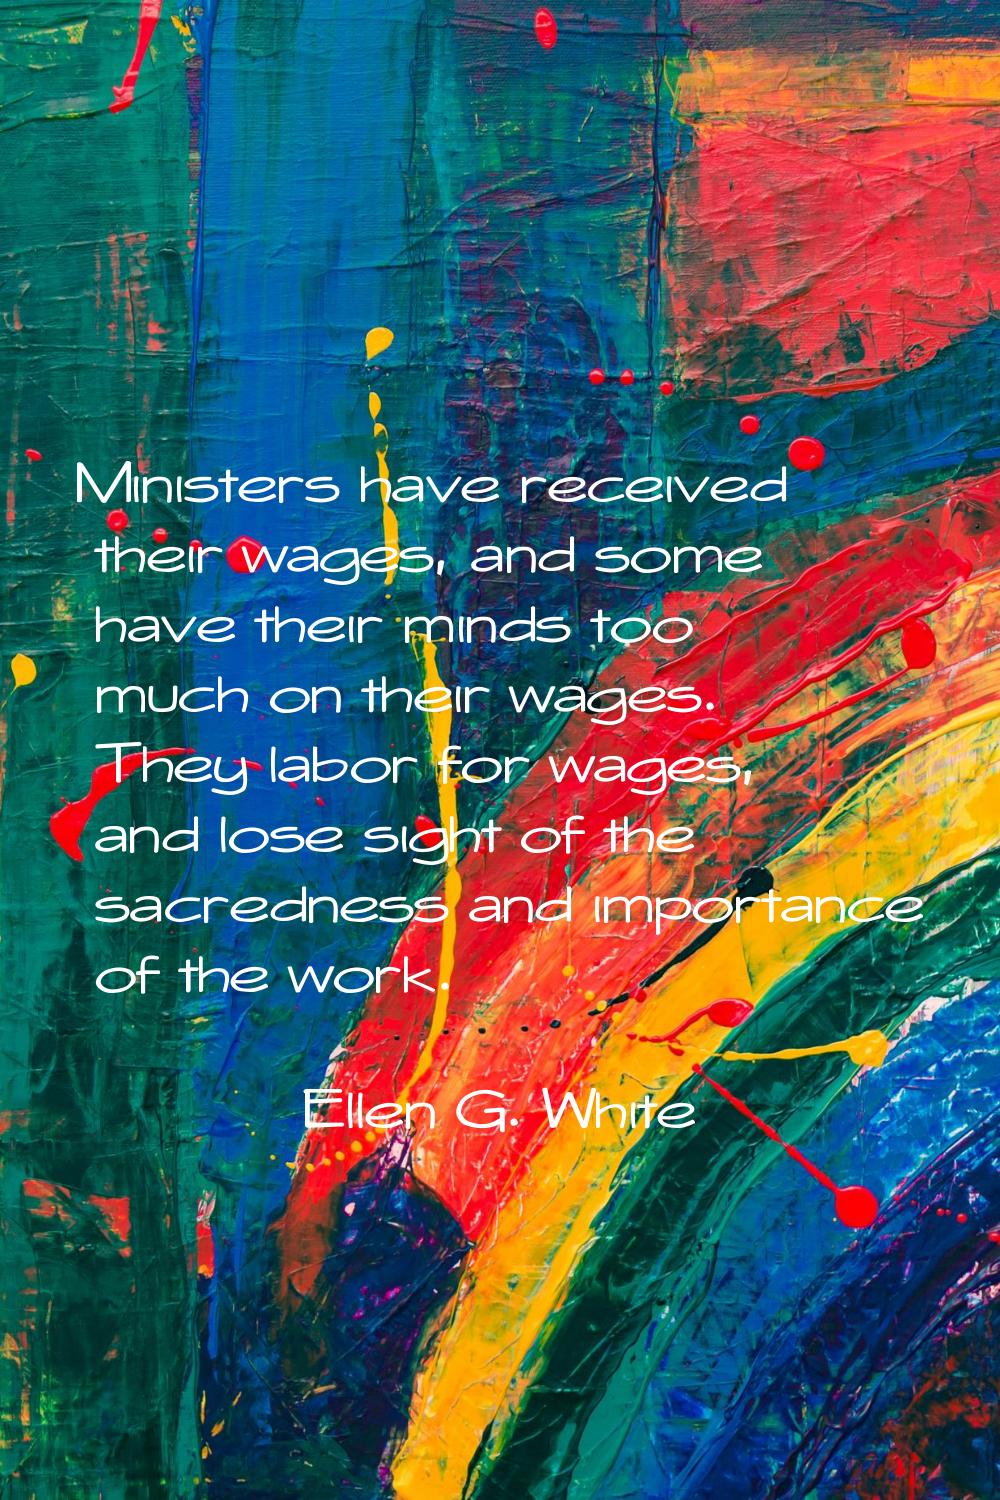 Ministers have received their wages, and some have their minds too much on their wages. They labor 